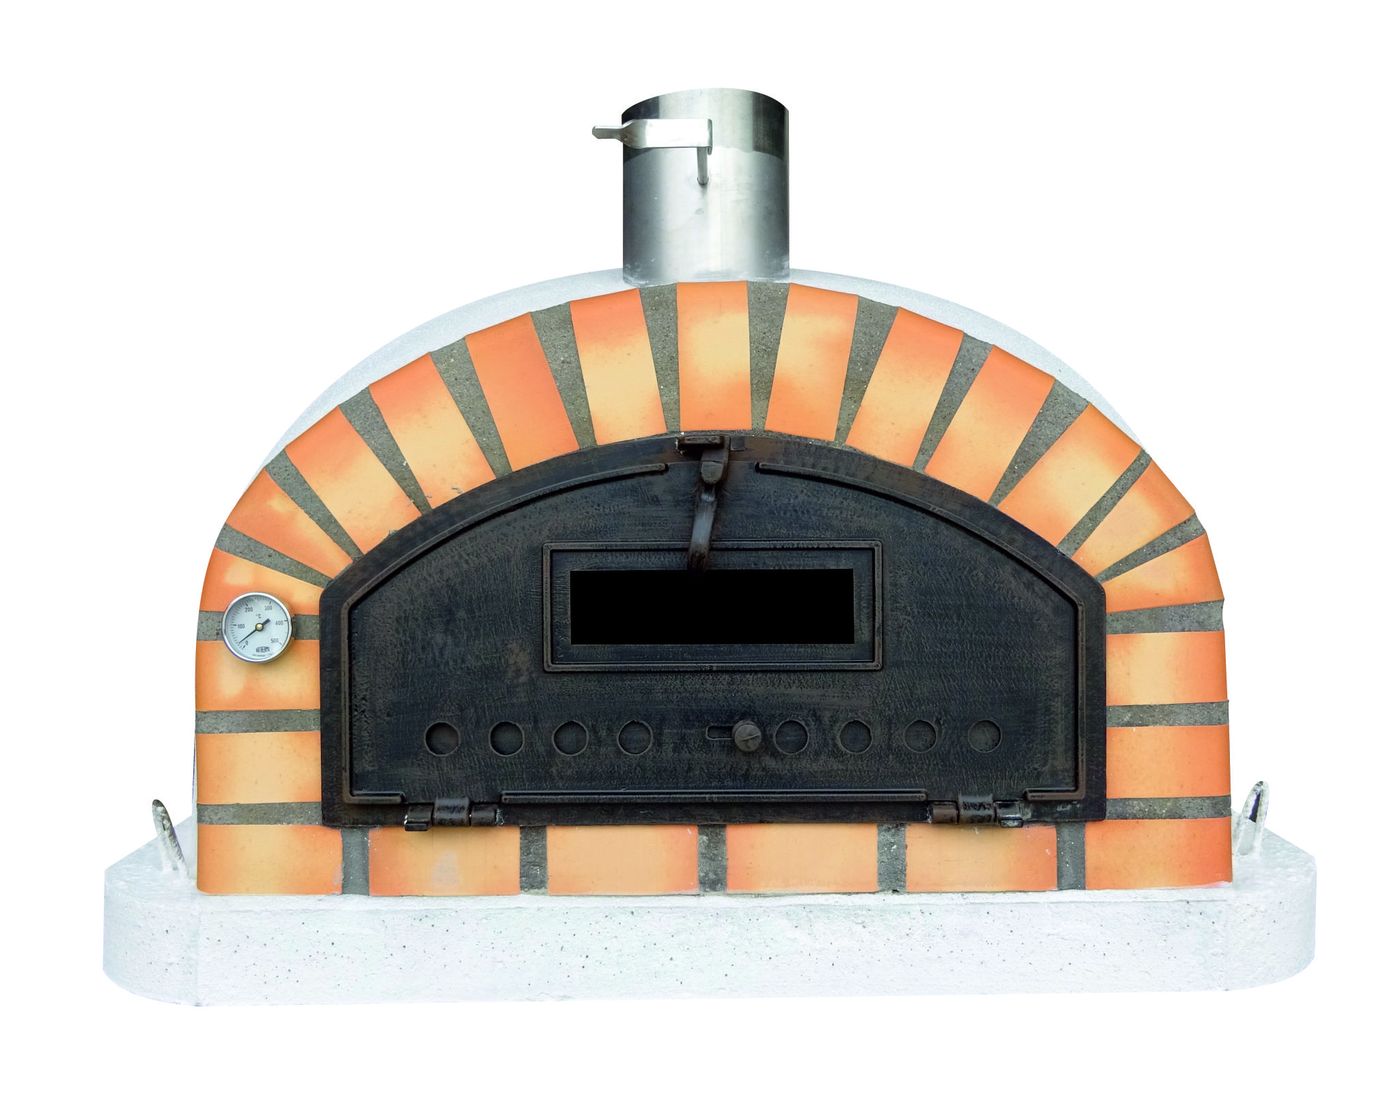 5 Advantages of Having A Wood-Fired Oven